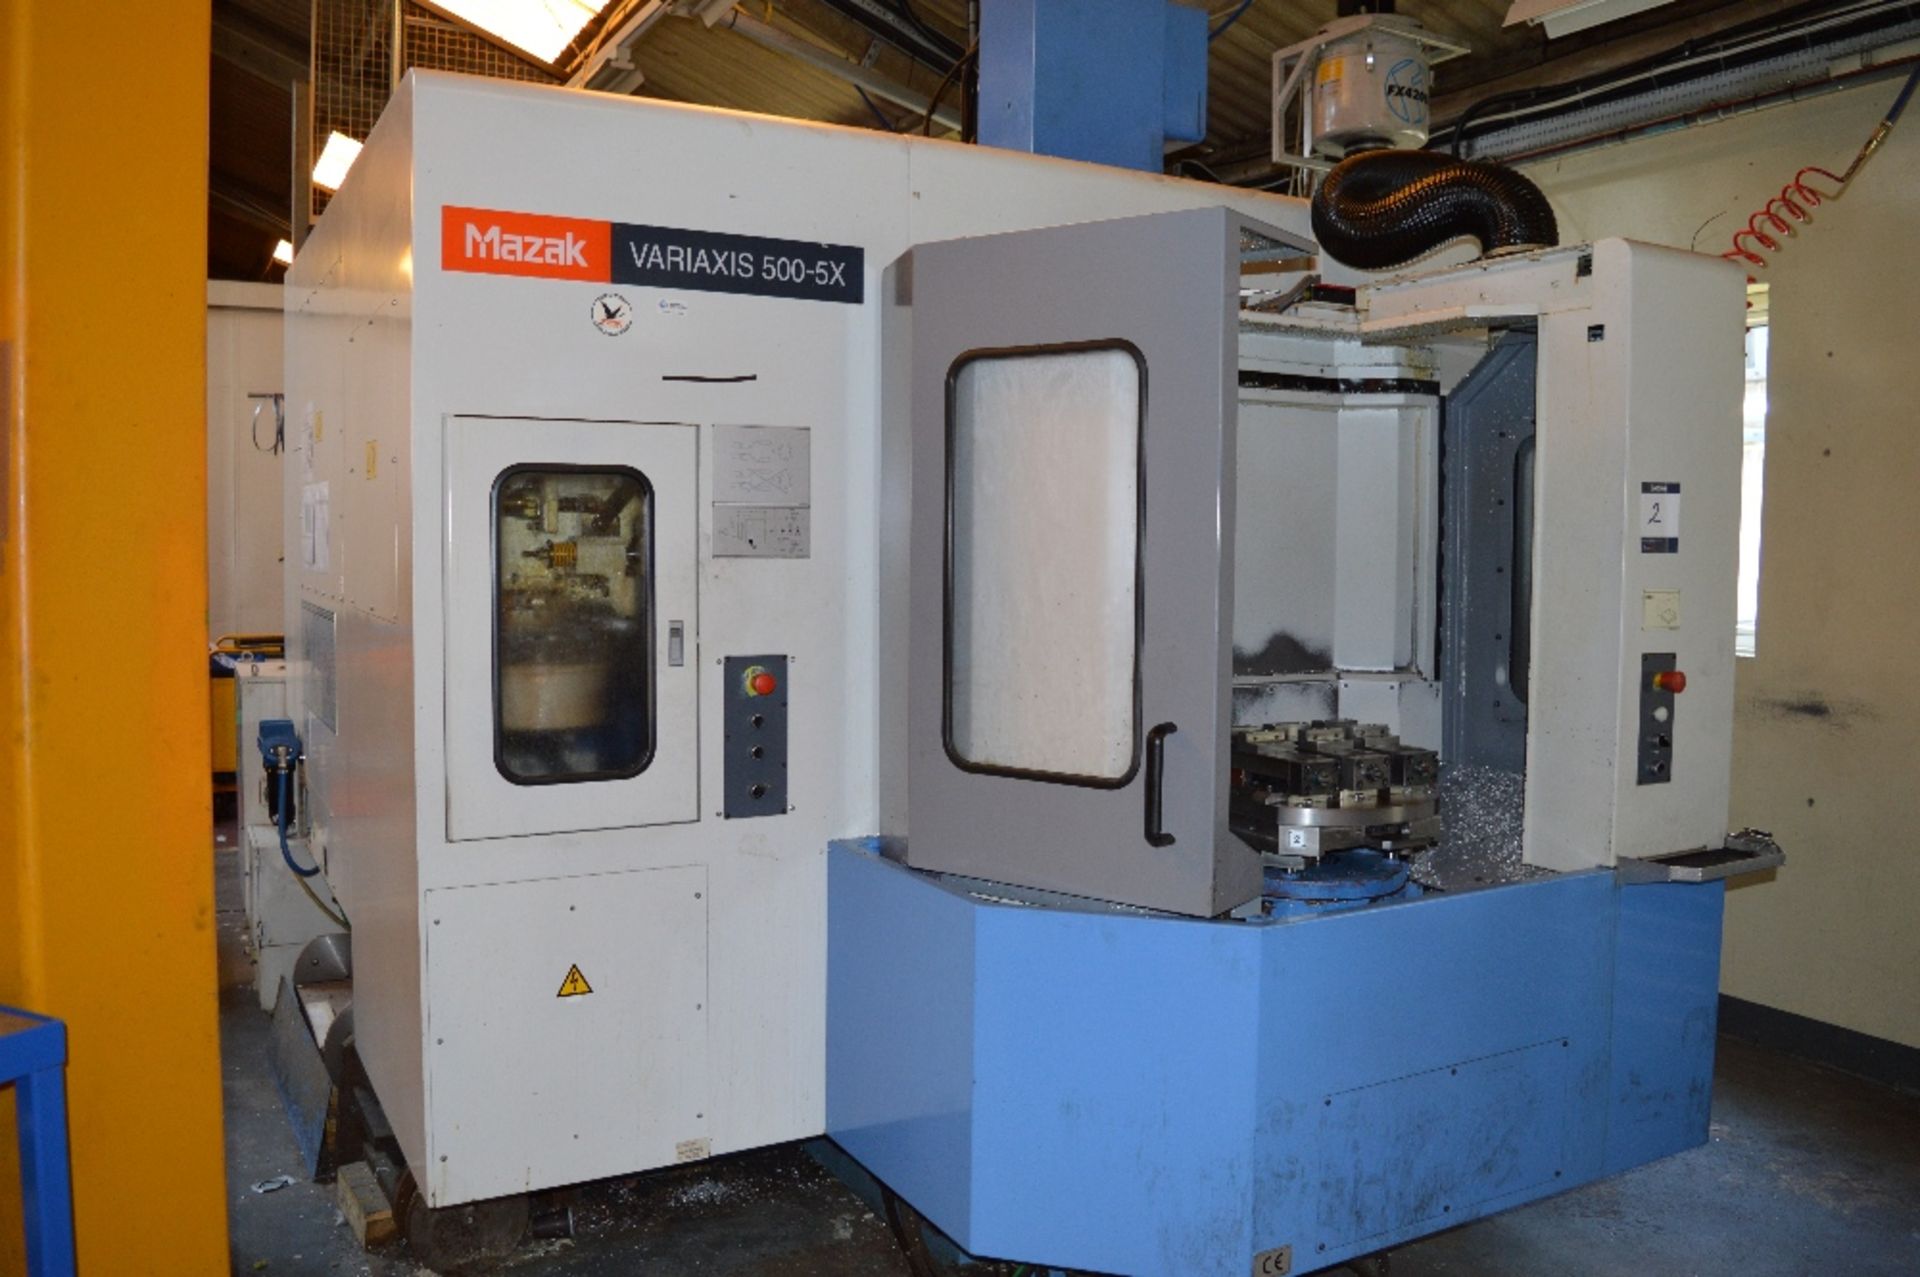 Mazak VARIAXIS 500-5X twin pallet 5 axis CNC verti - Image 7 of 19